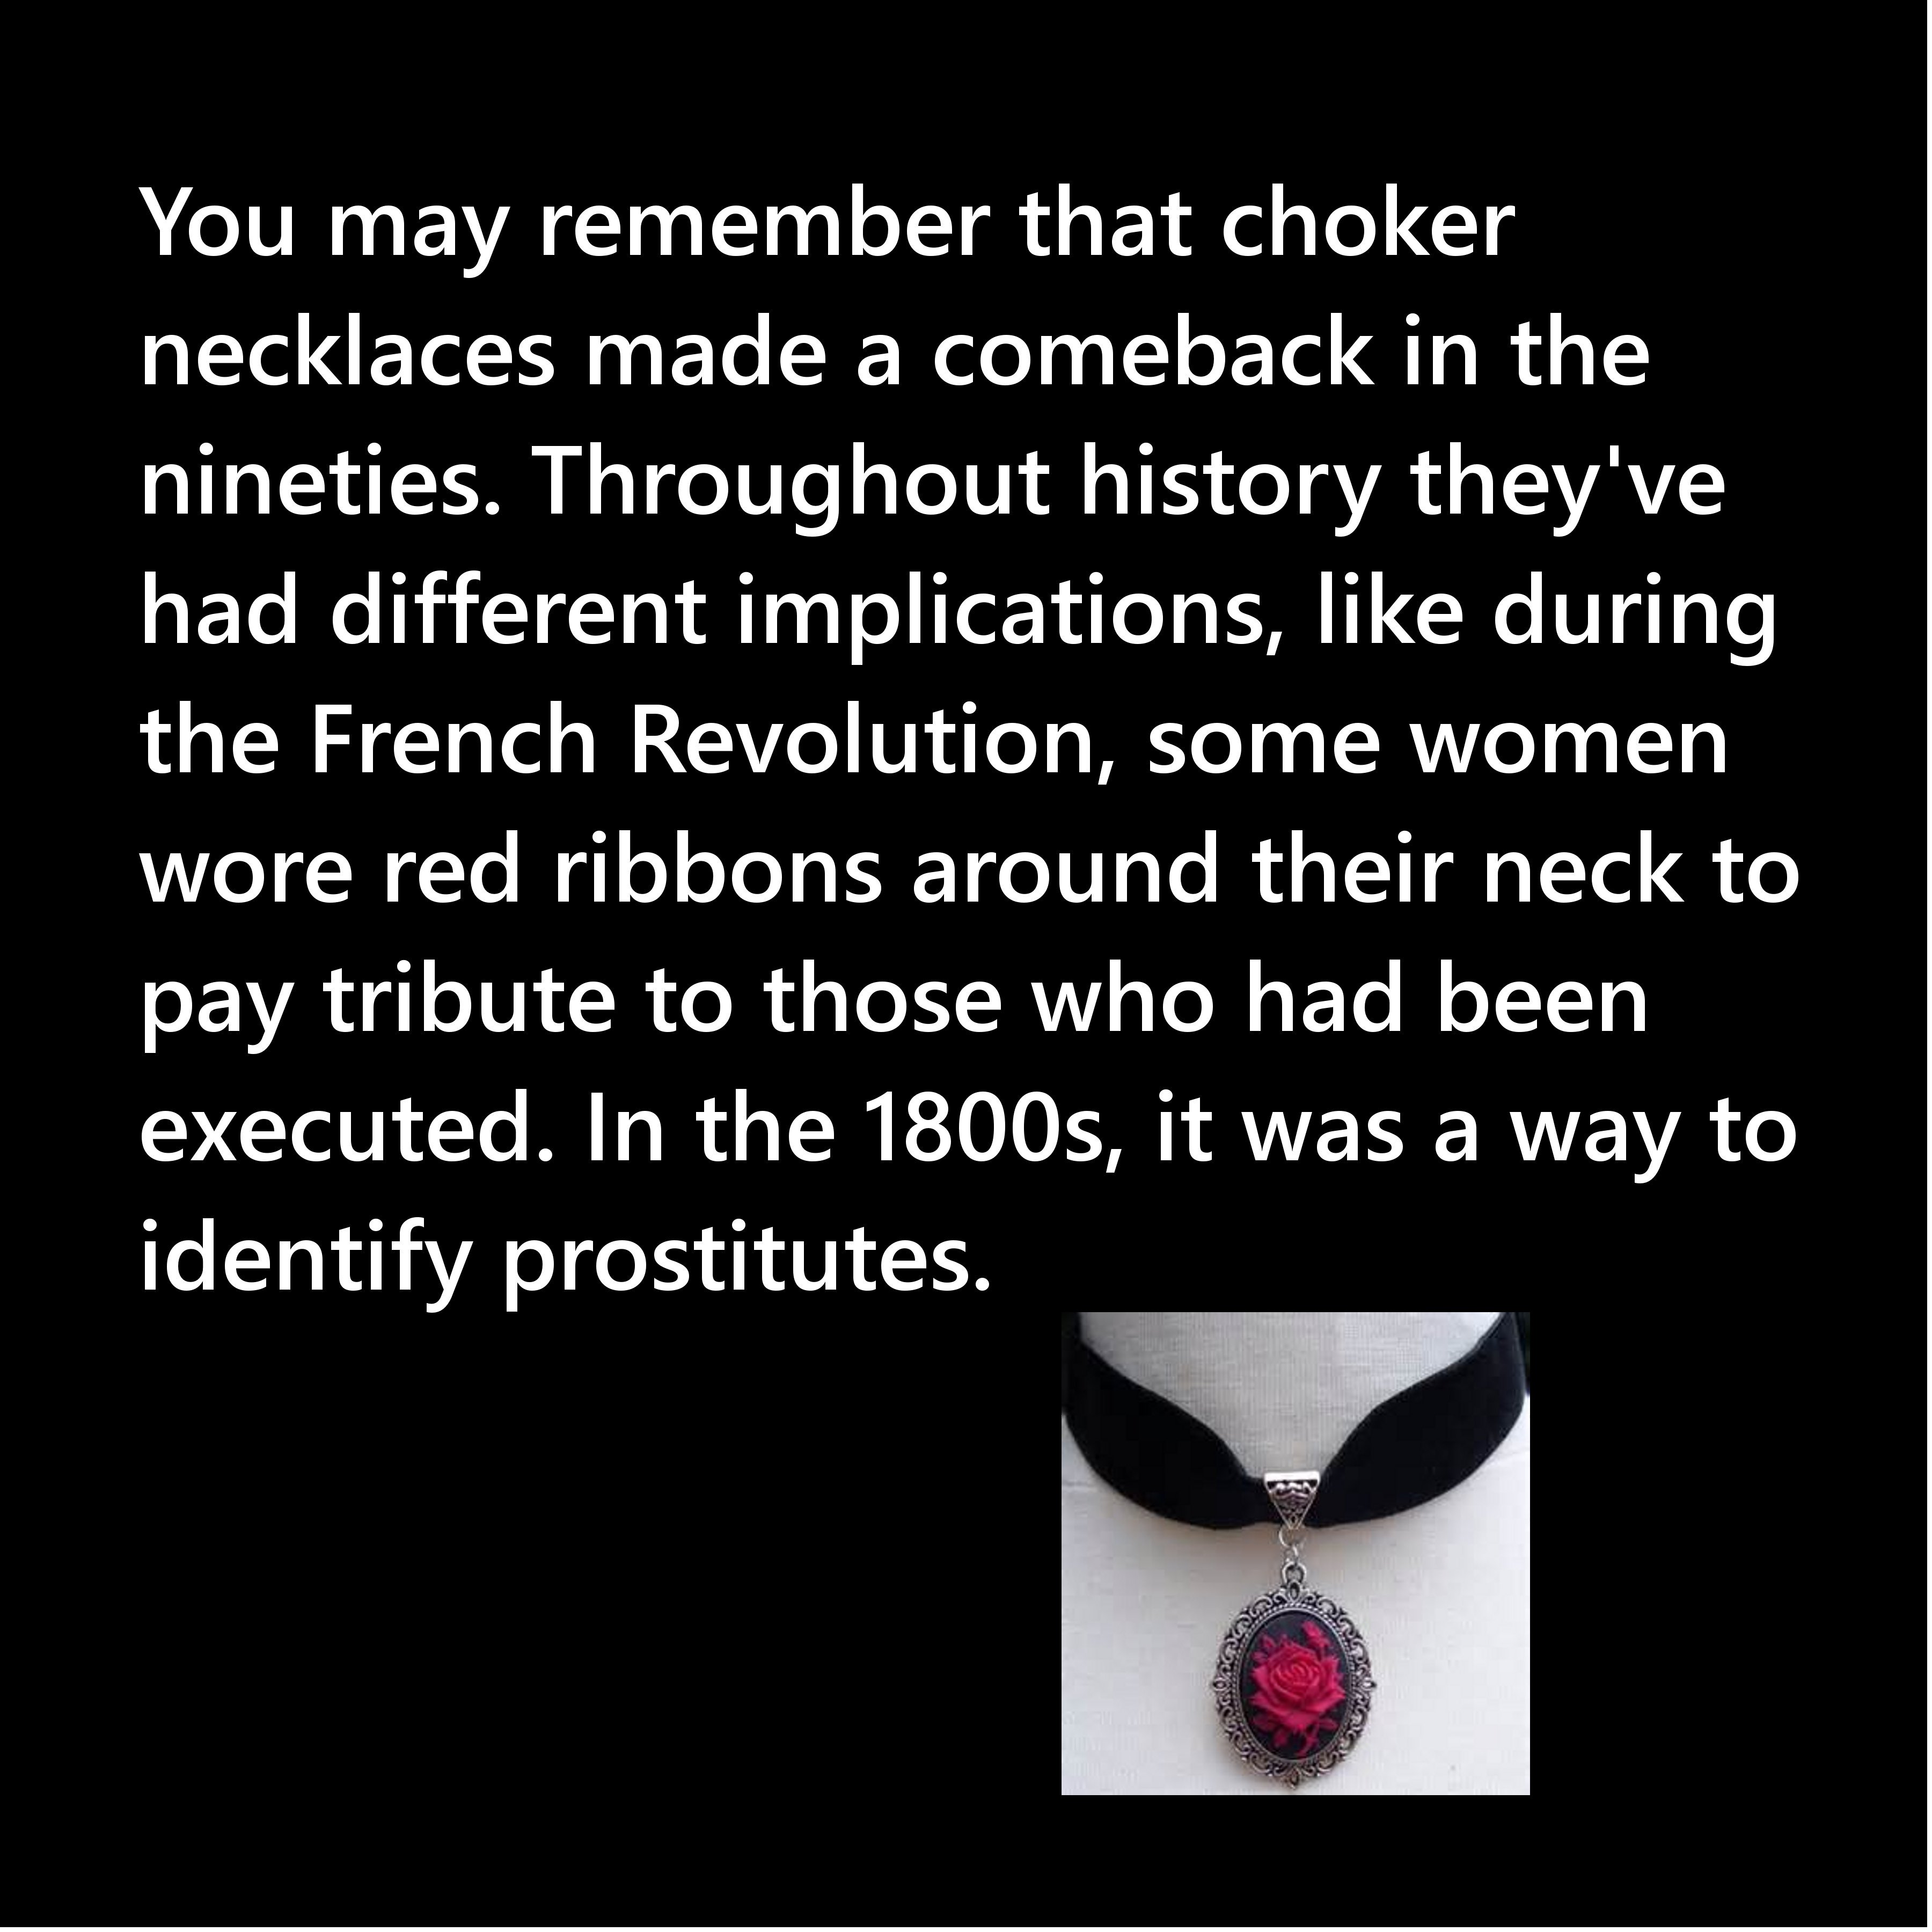 kabbalah centre - You may remember that choker necklaces made a comeback in the nineties. Throughout history they've had different implications, during the French Revolution, some women wore red ribbons around their neck to pay tribute to those who had be